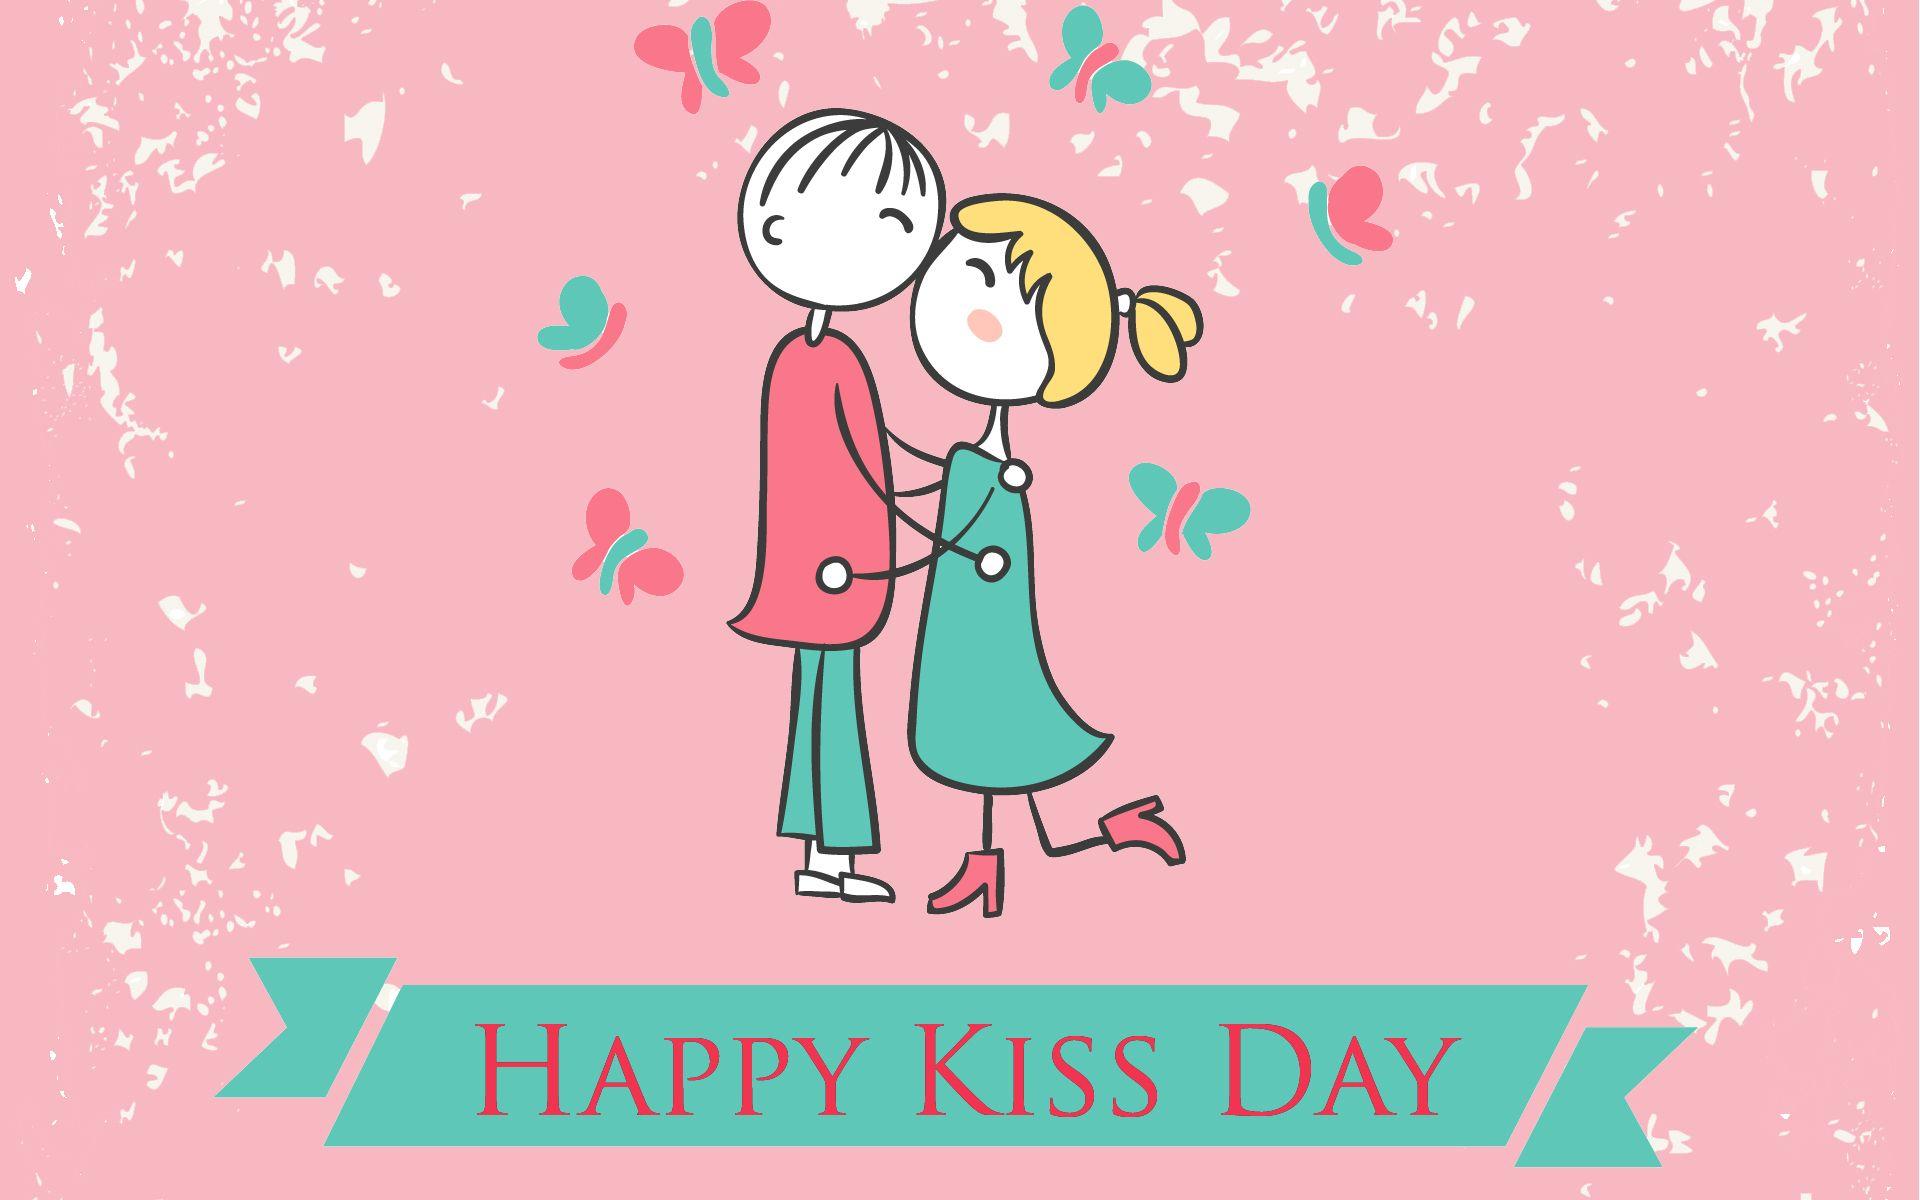 Happy Kiss Day 2016 HD HQ Wallpaper, Image, Photo, Pics For Her / HIM